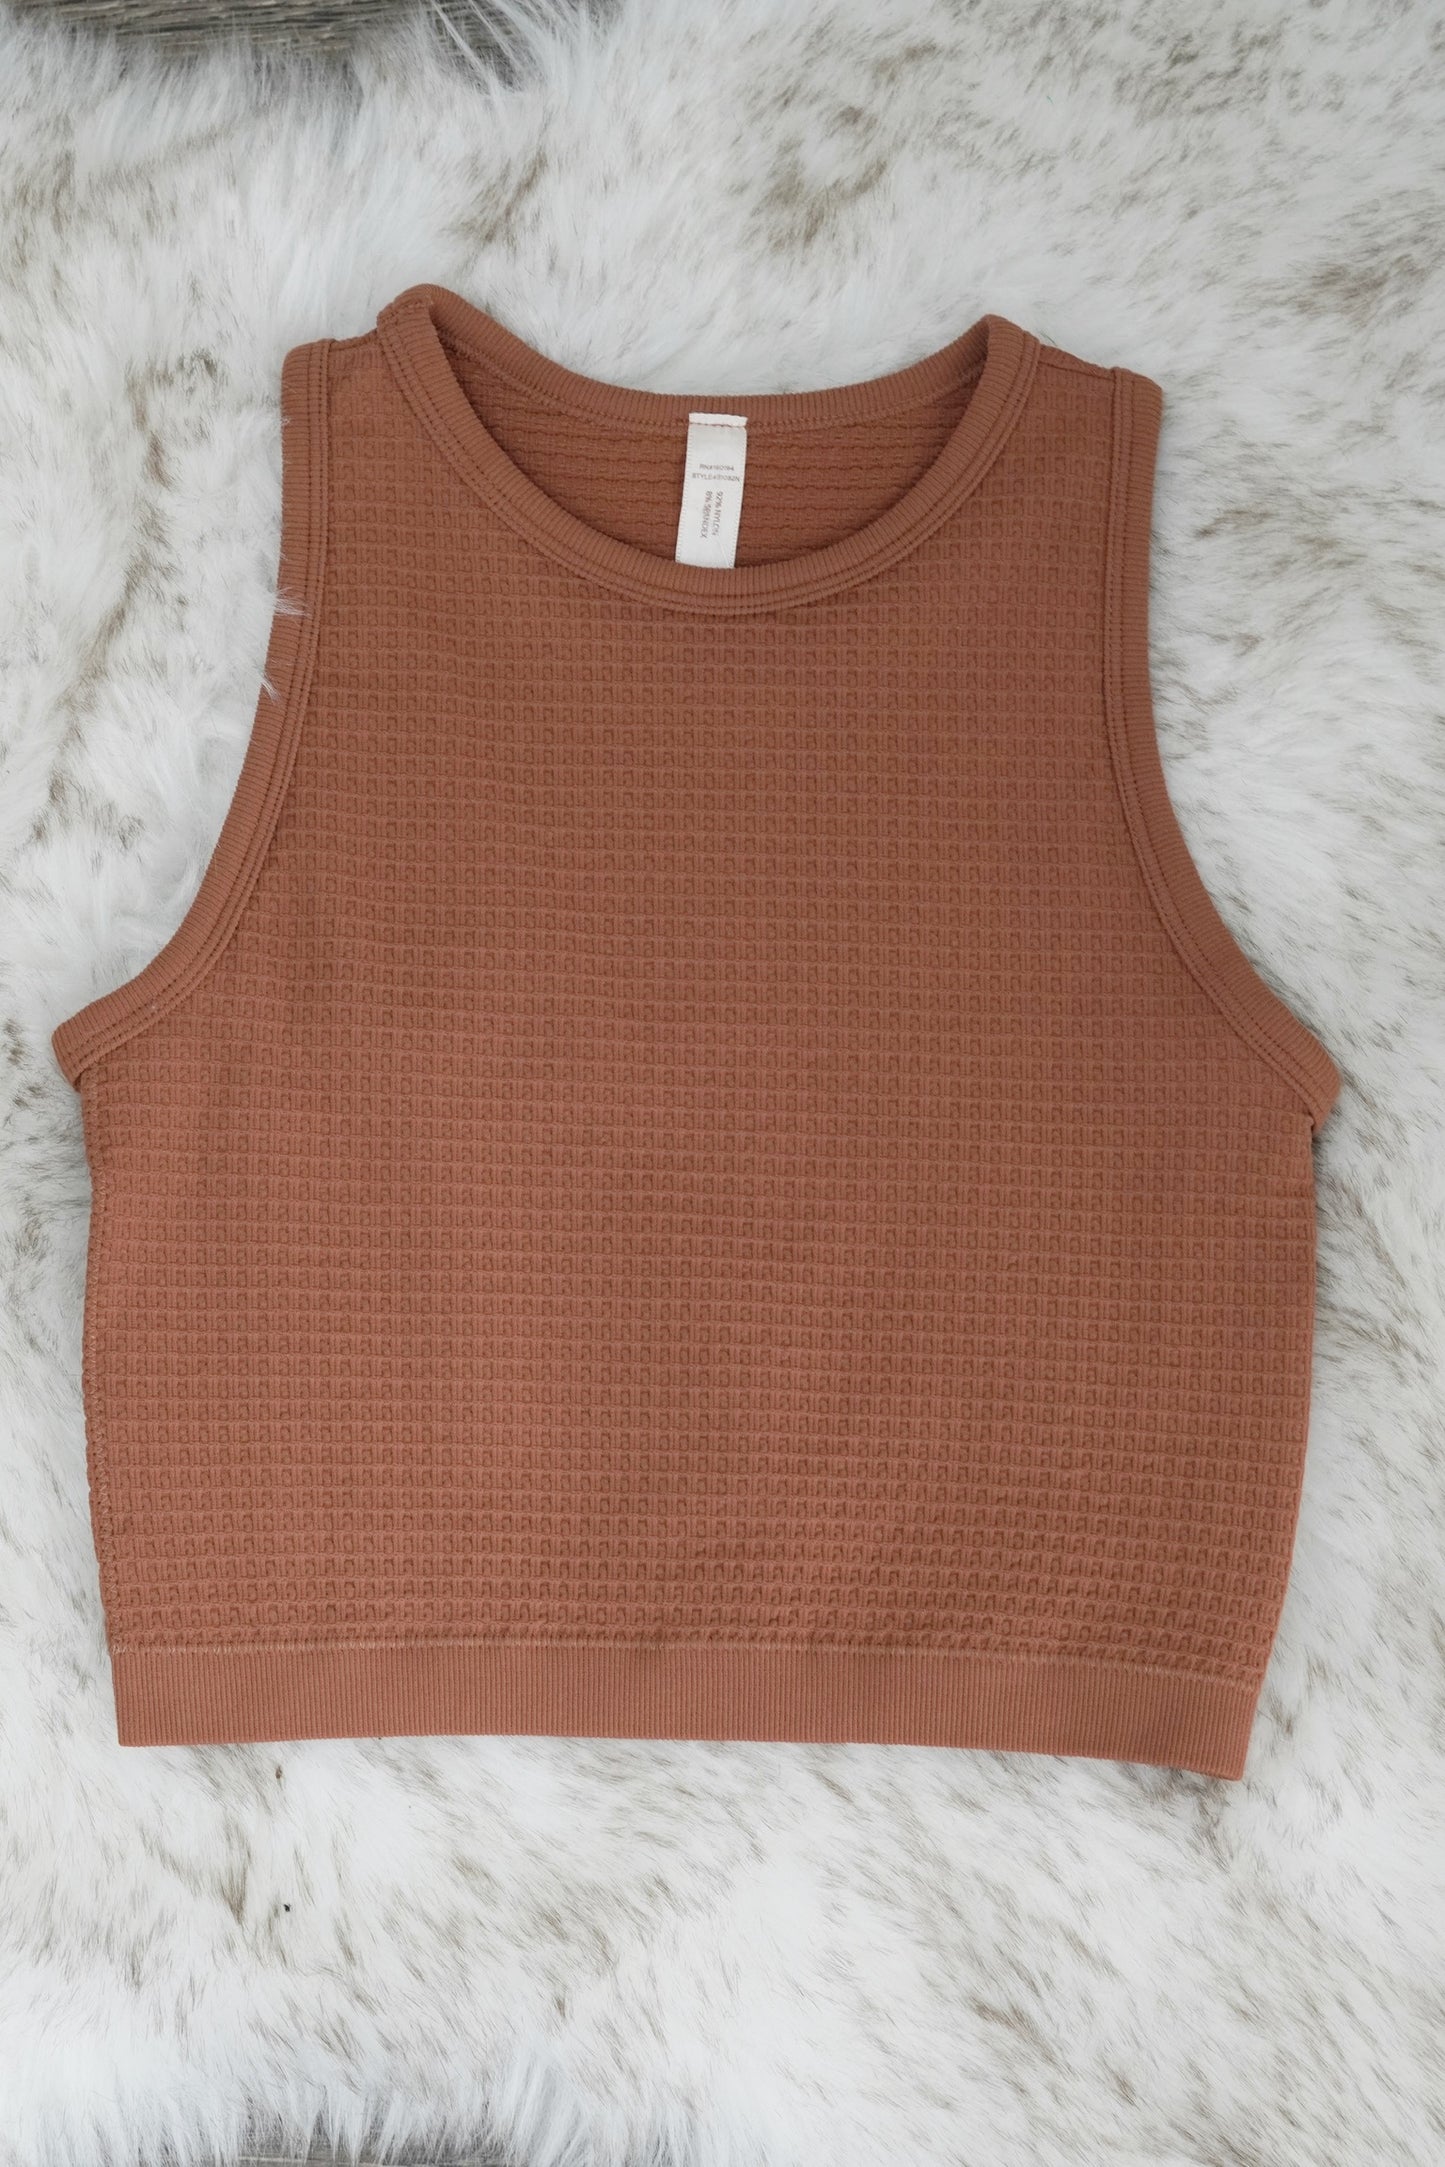 Tulla Textured Tank Top Round Neckline Sleeveless Textured Material Colors: , Ginger Fitted Cropped 92% Nylon, 8% Spandex